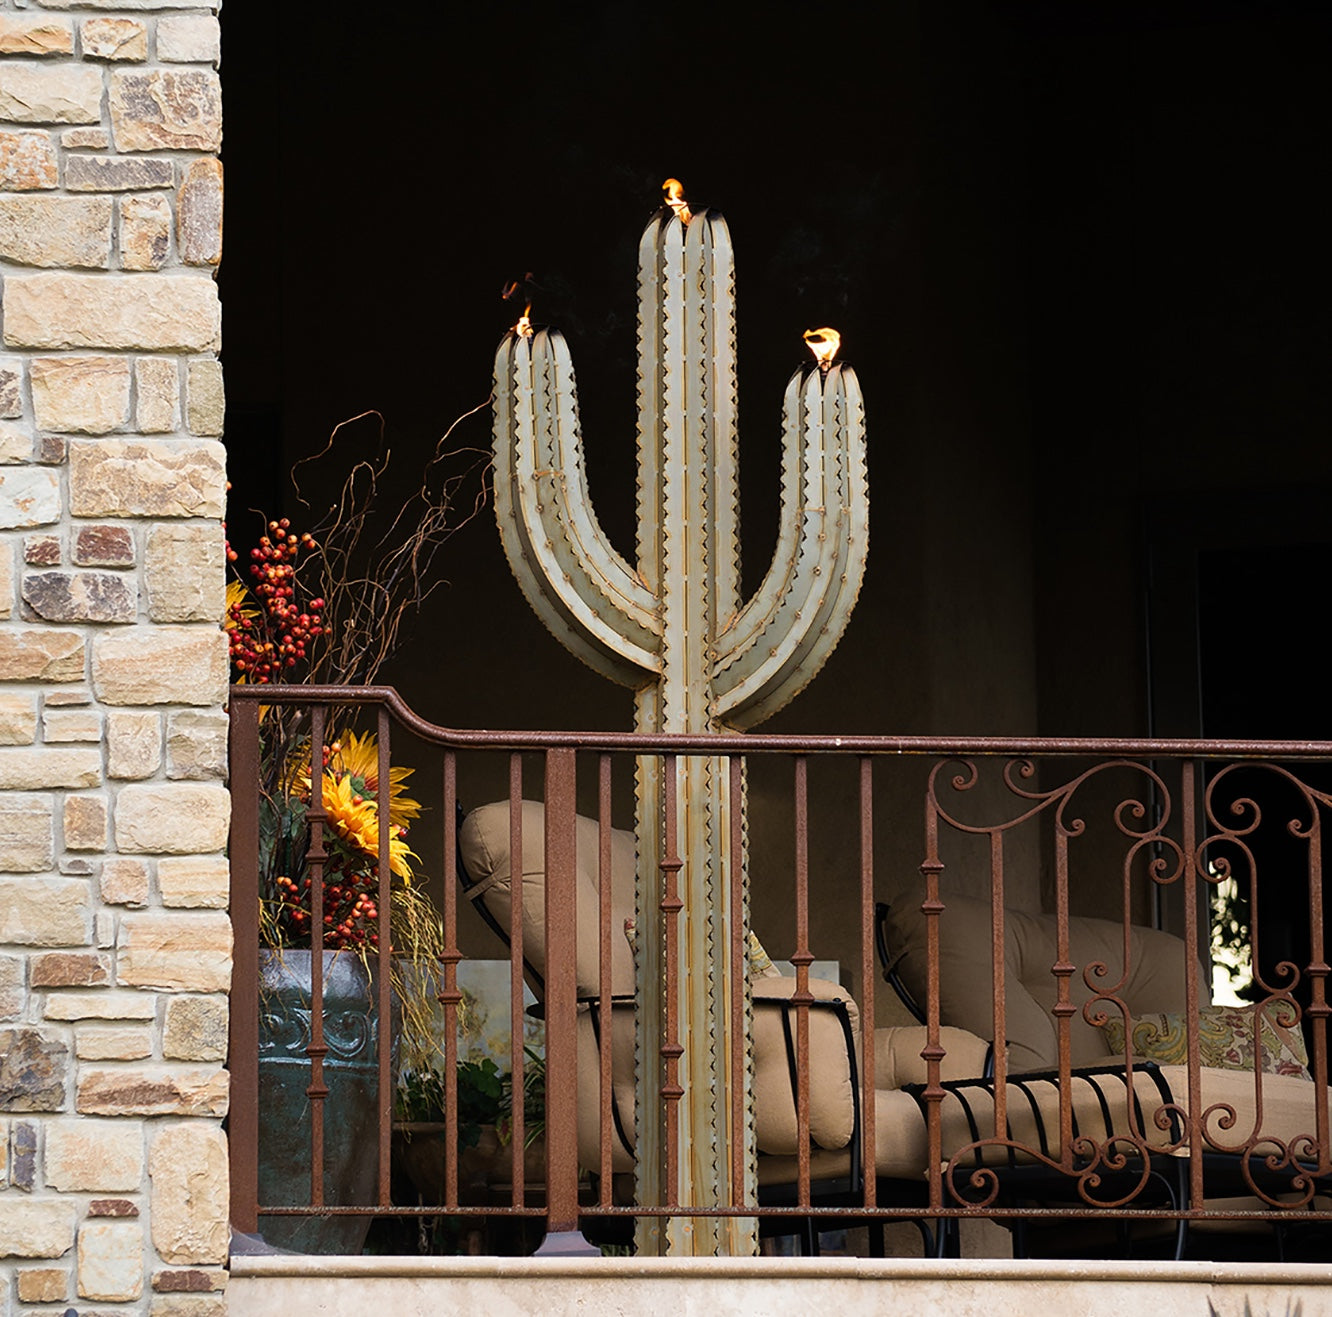 A metal saguaro cactus torch illuminated on a balcony. The sculpture's intricate design features a realistic saguaro body and arms, creating a lifelike appearance.